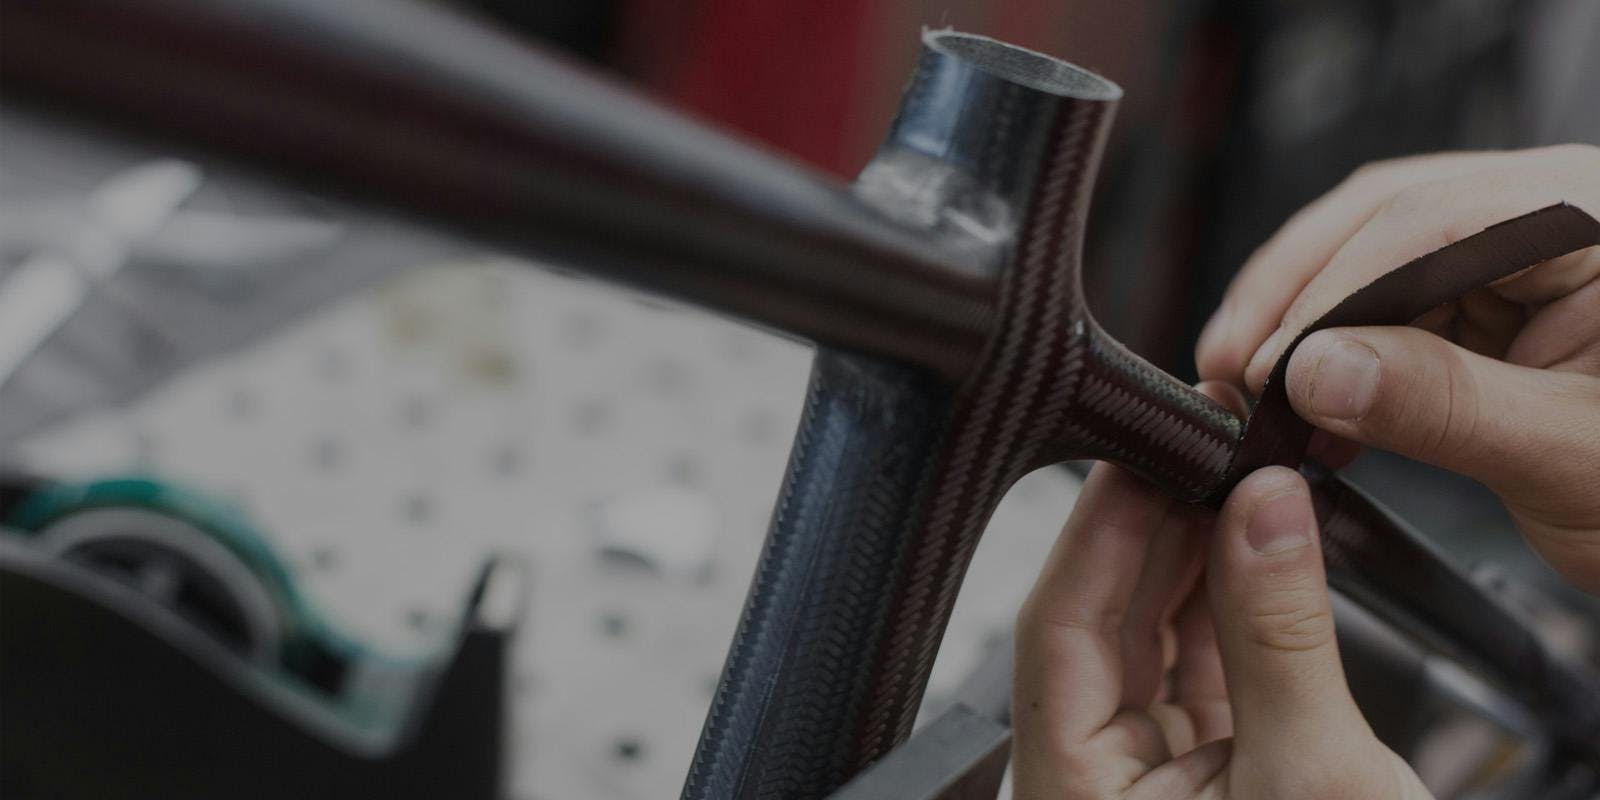 An engineer adding pieces of carbon fiber to the rear triangle of a hardtail bicycle frame